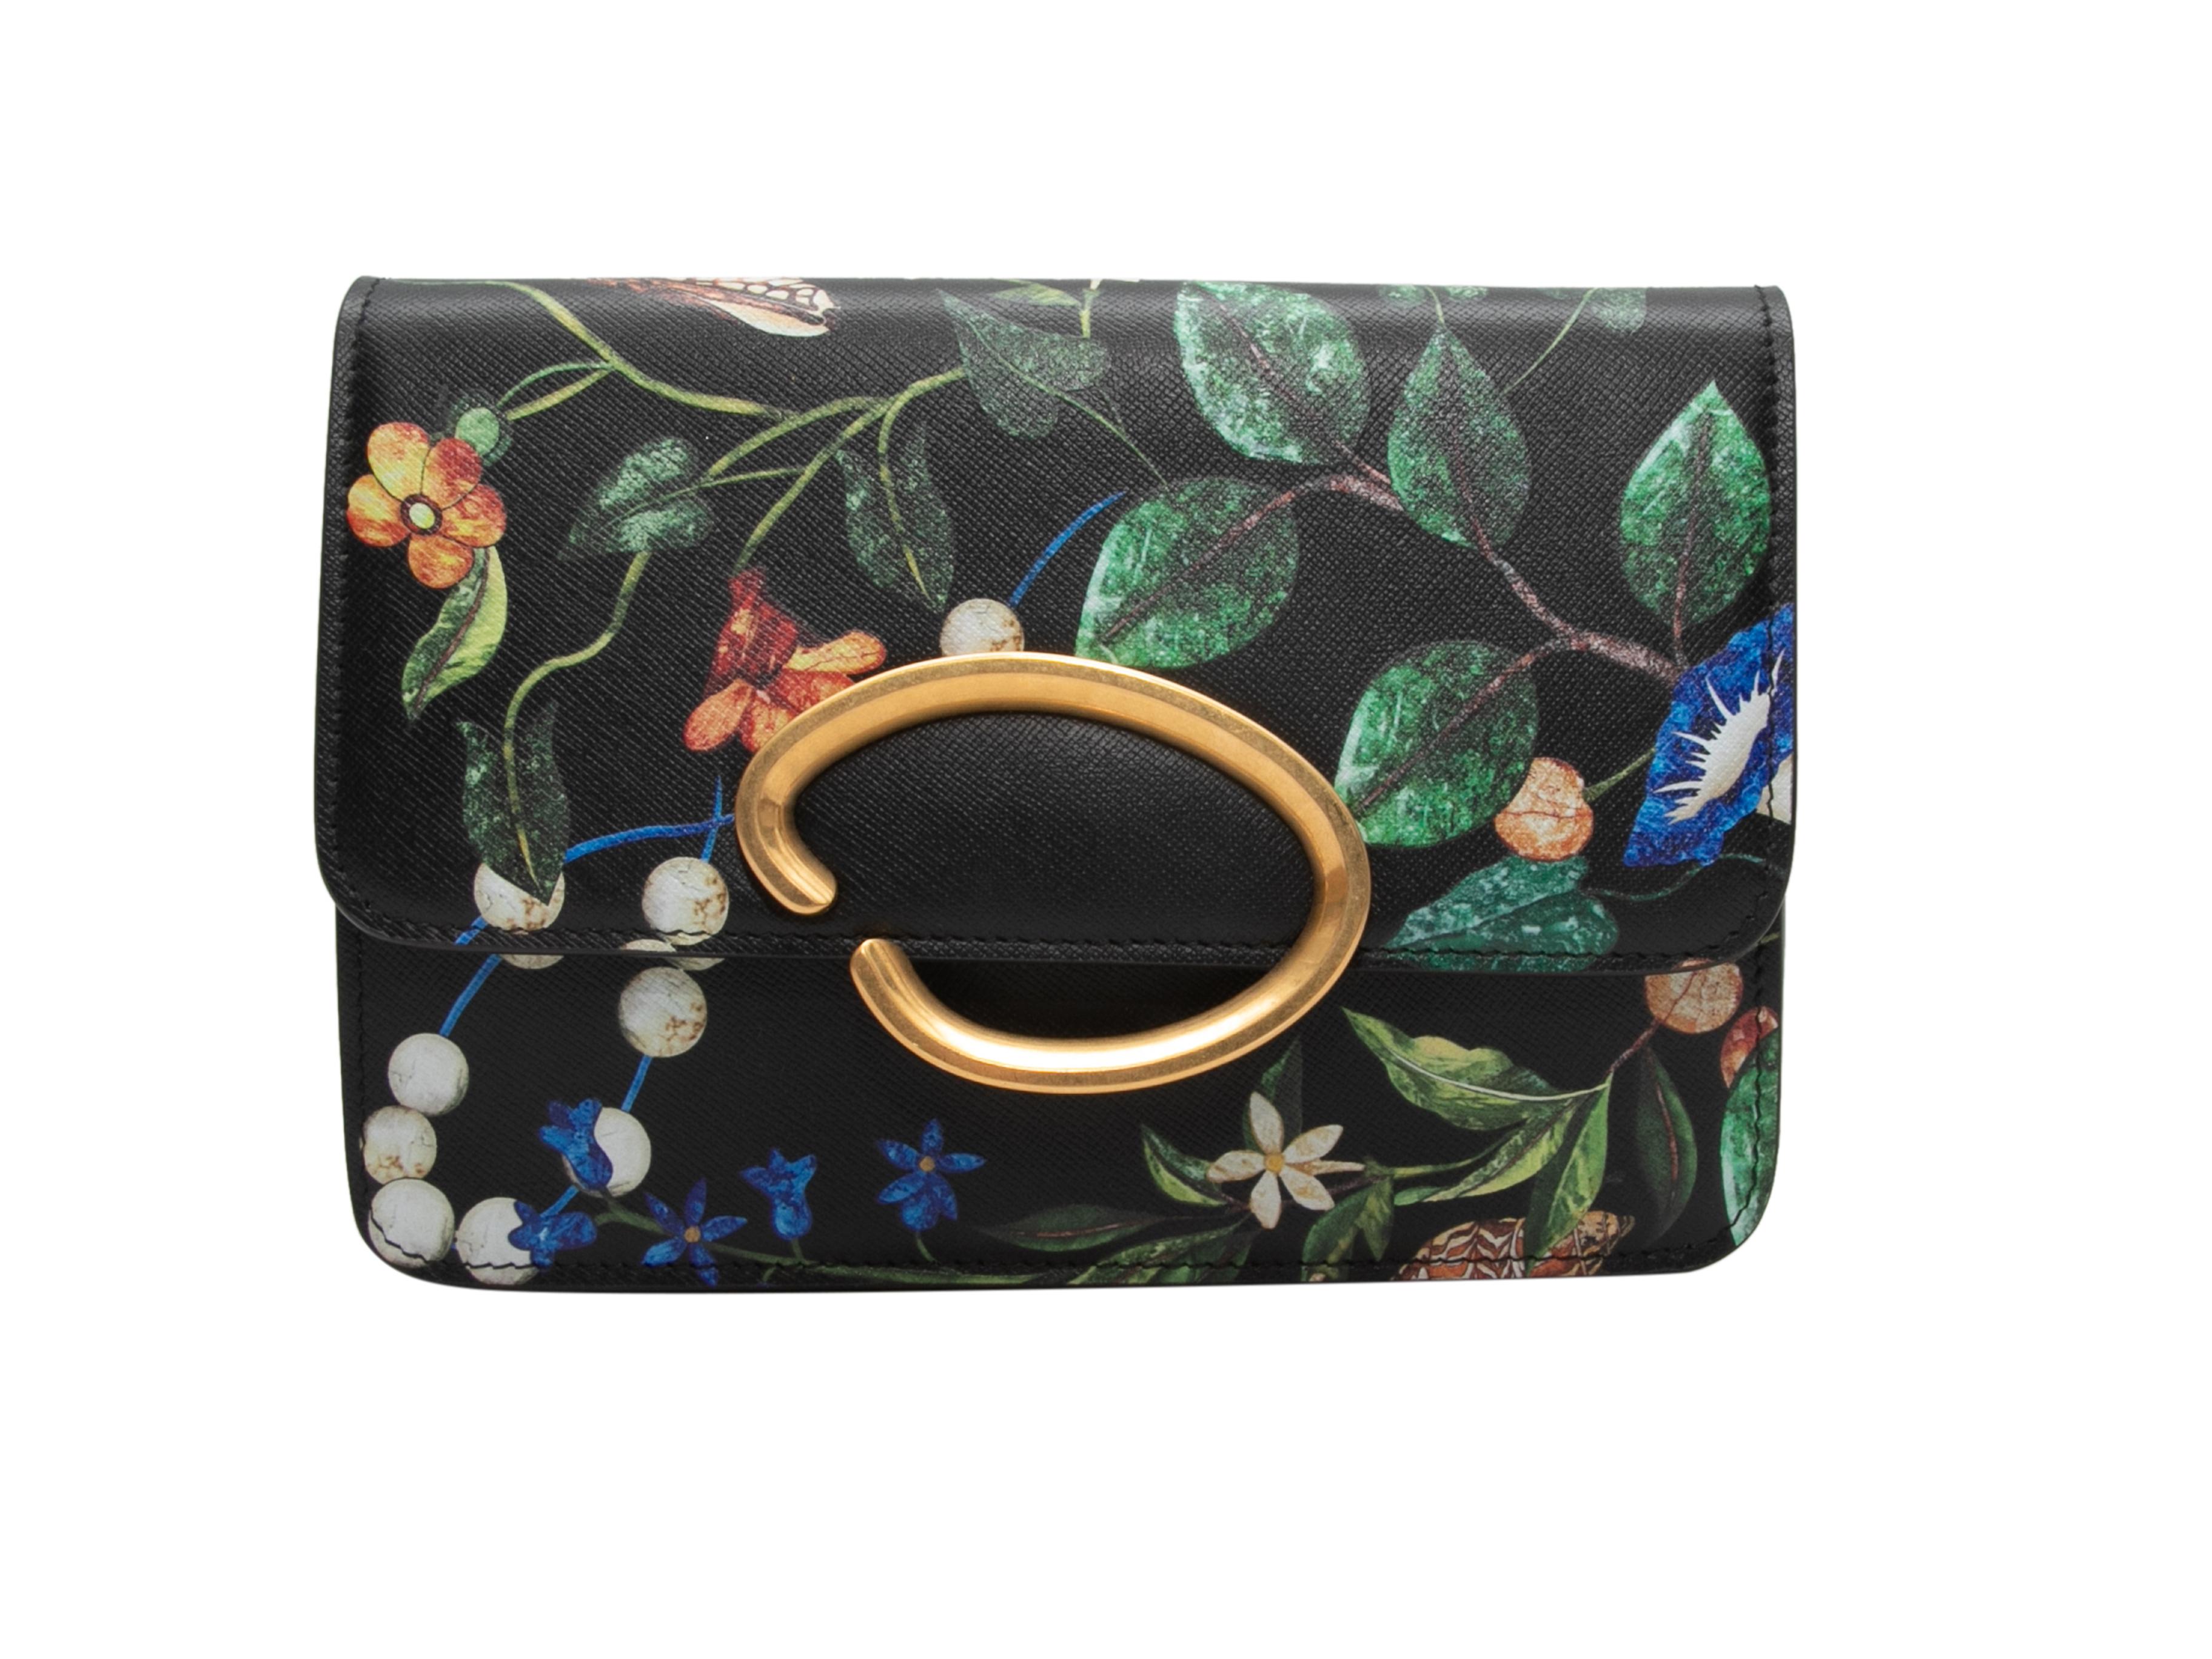 Black & Multicolor Oscar de la Renta Floral Print Pochette. This pochette features and printed leather body, gold-tone hardware, a single leather and chain-link shoulder strap, and a front flap closure. 7.5